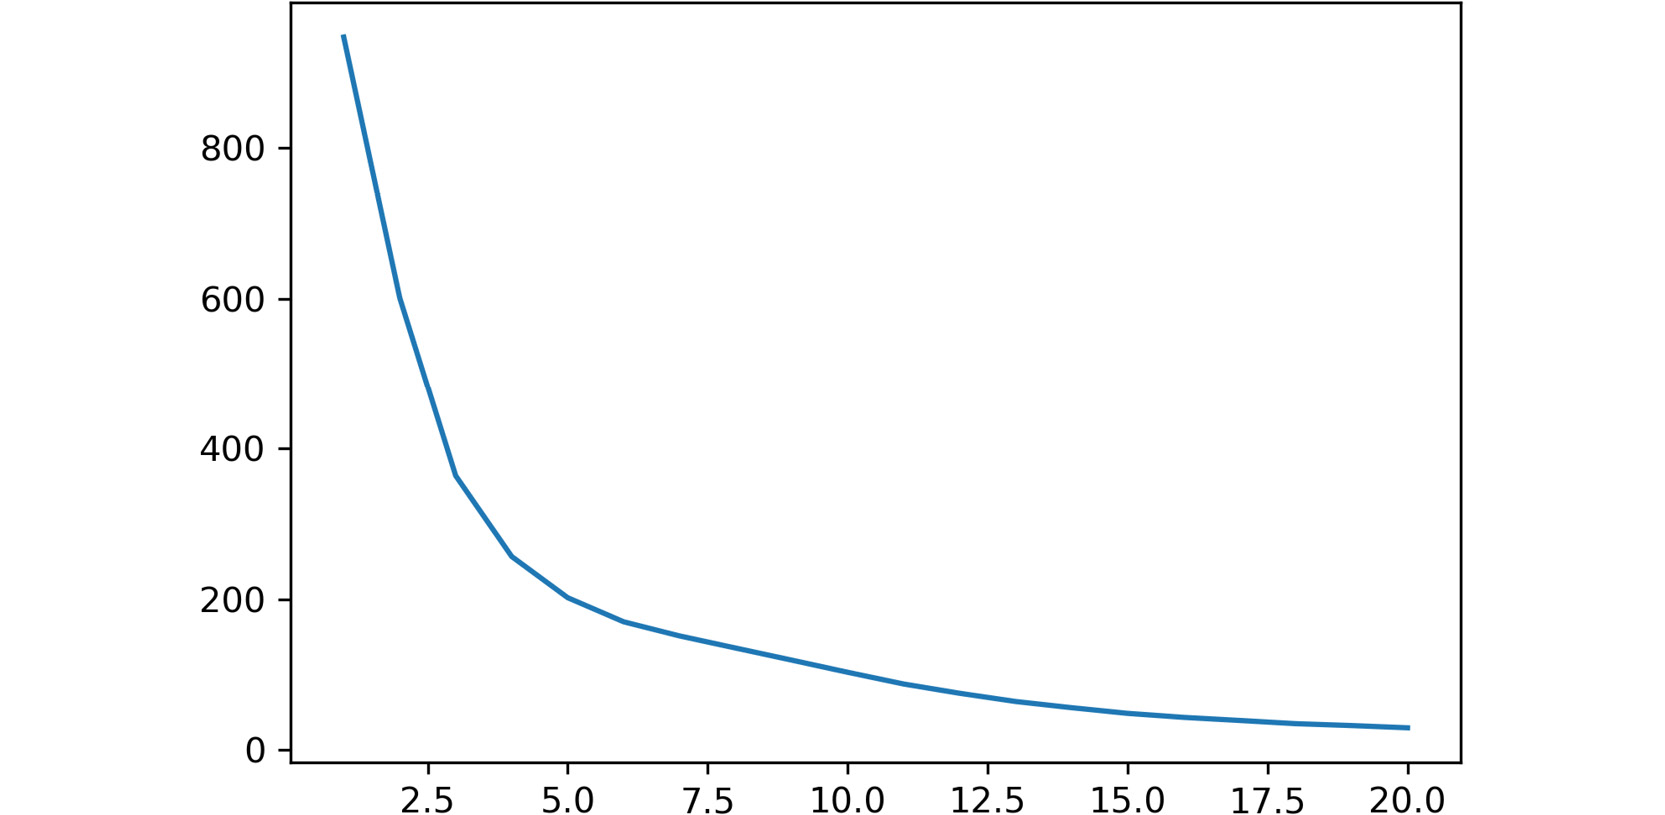 Figure 2.7: A screenshot showing the output of the plot function used
